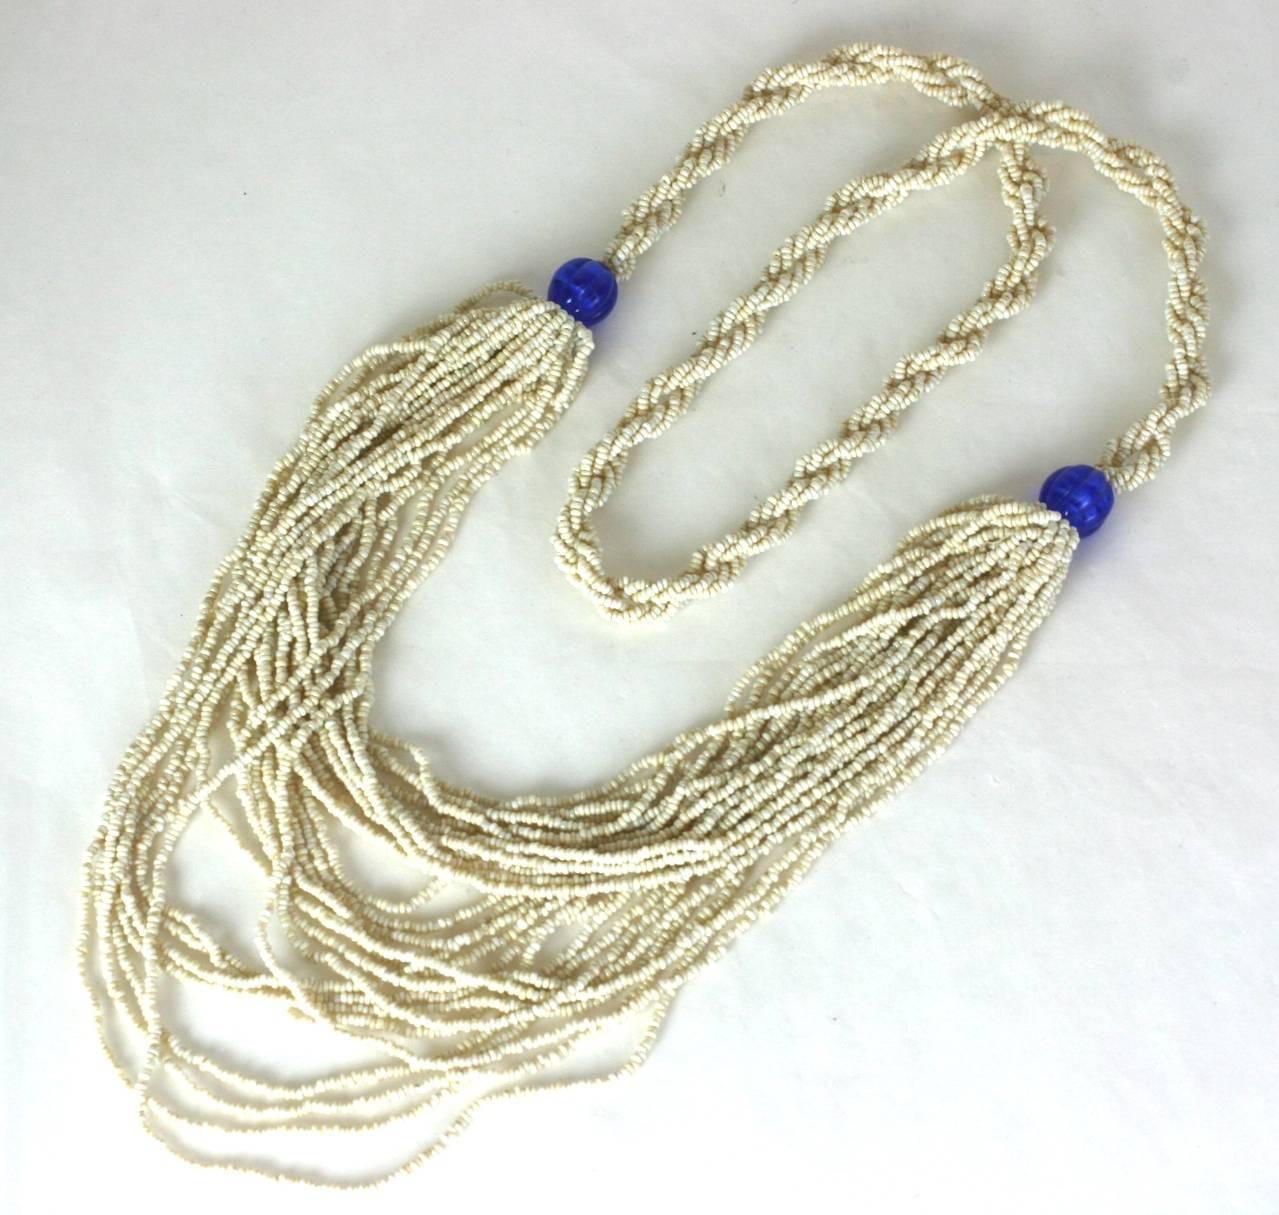 Lovely Art Deco Maison Gripoix rope necklace of micro faux seed pearls. The upper strands of the necklace are softly twisted and braided while lower bib falls in loose draped strands, with faux sapphire melon cut bead stations. 1920's France.